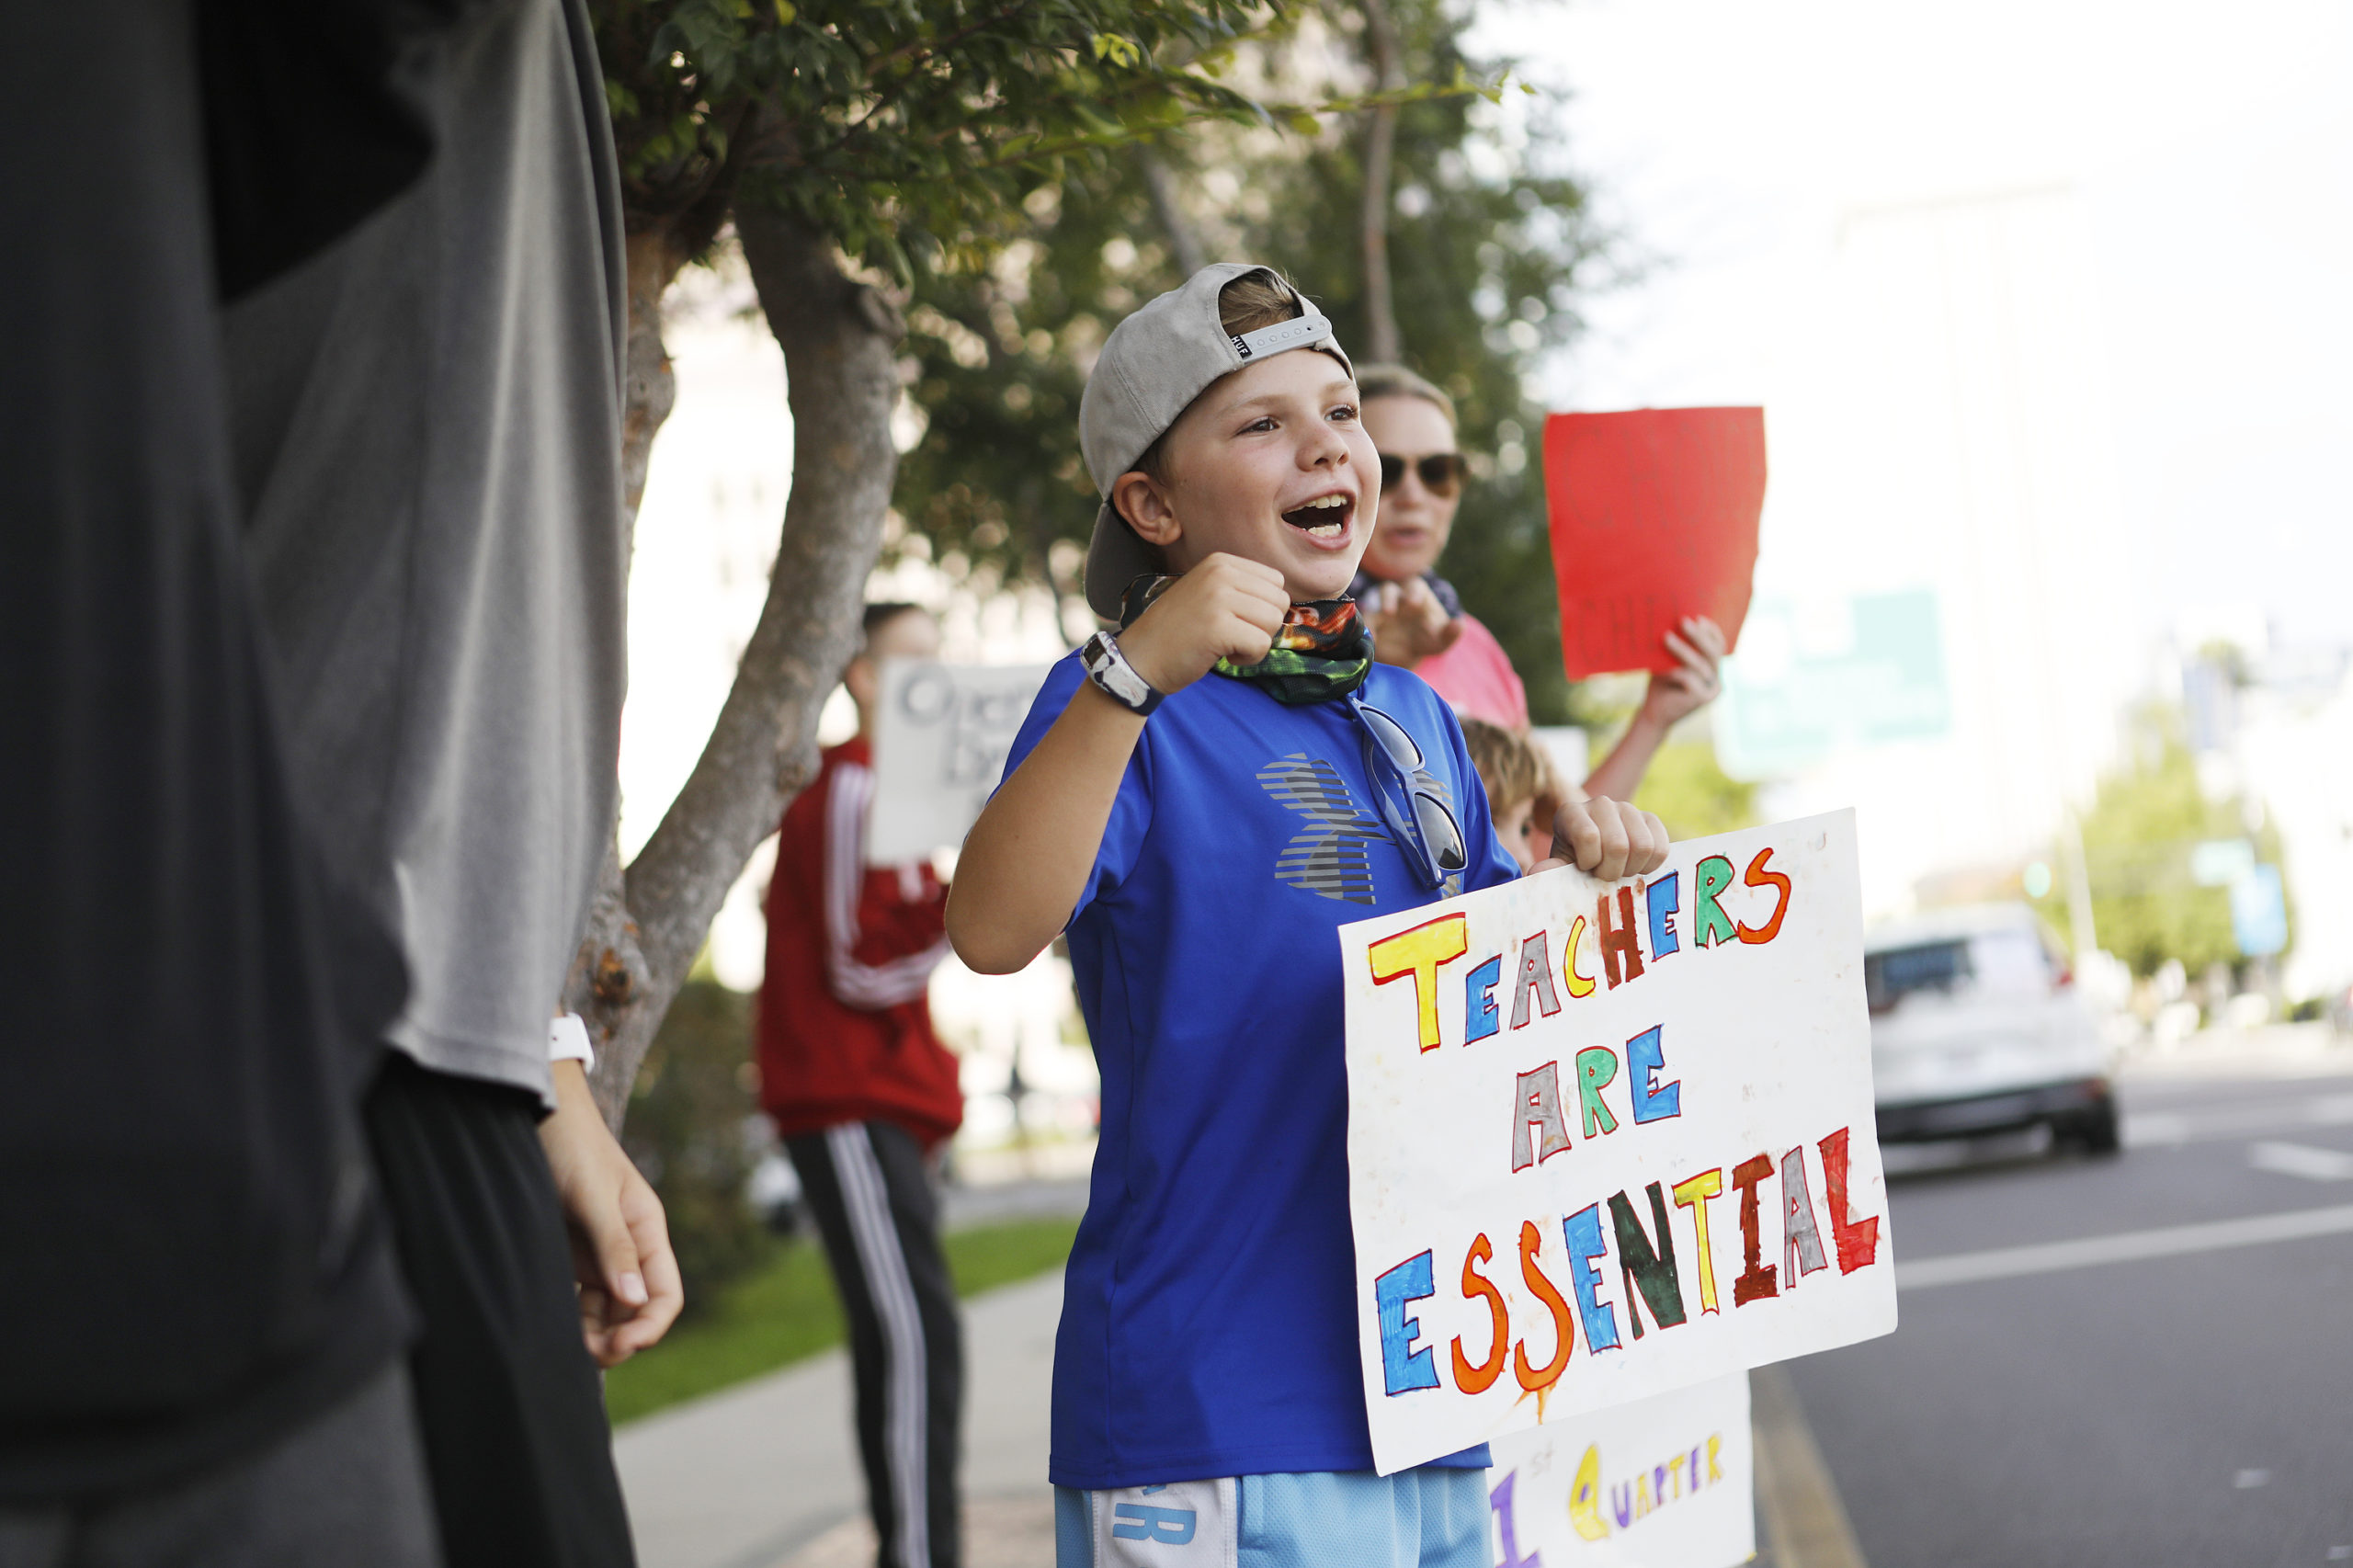 Fifth-grader Jackson Pijanowski a supporter calling for Hillsborough County schools to reopen protests ahead of a meeting of the school board at the Hillsborough County Public Schools district office on August 6, 2020 in Tampa, Florida. The Hillsborough County School Board held a special meeting to decide if schools will reopen during the COVID-19 pandemic. (Photo by Octavio Jones/Getty Images)